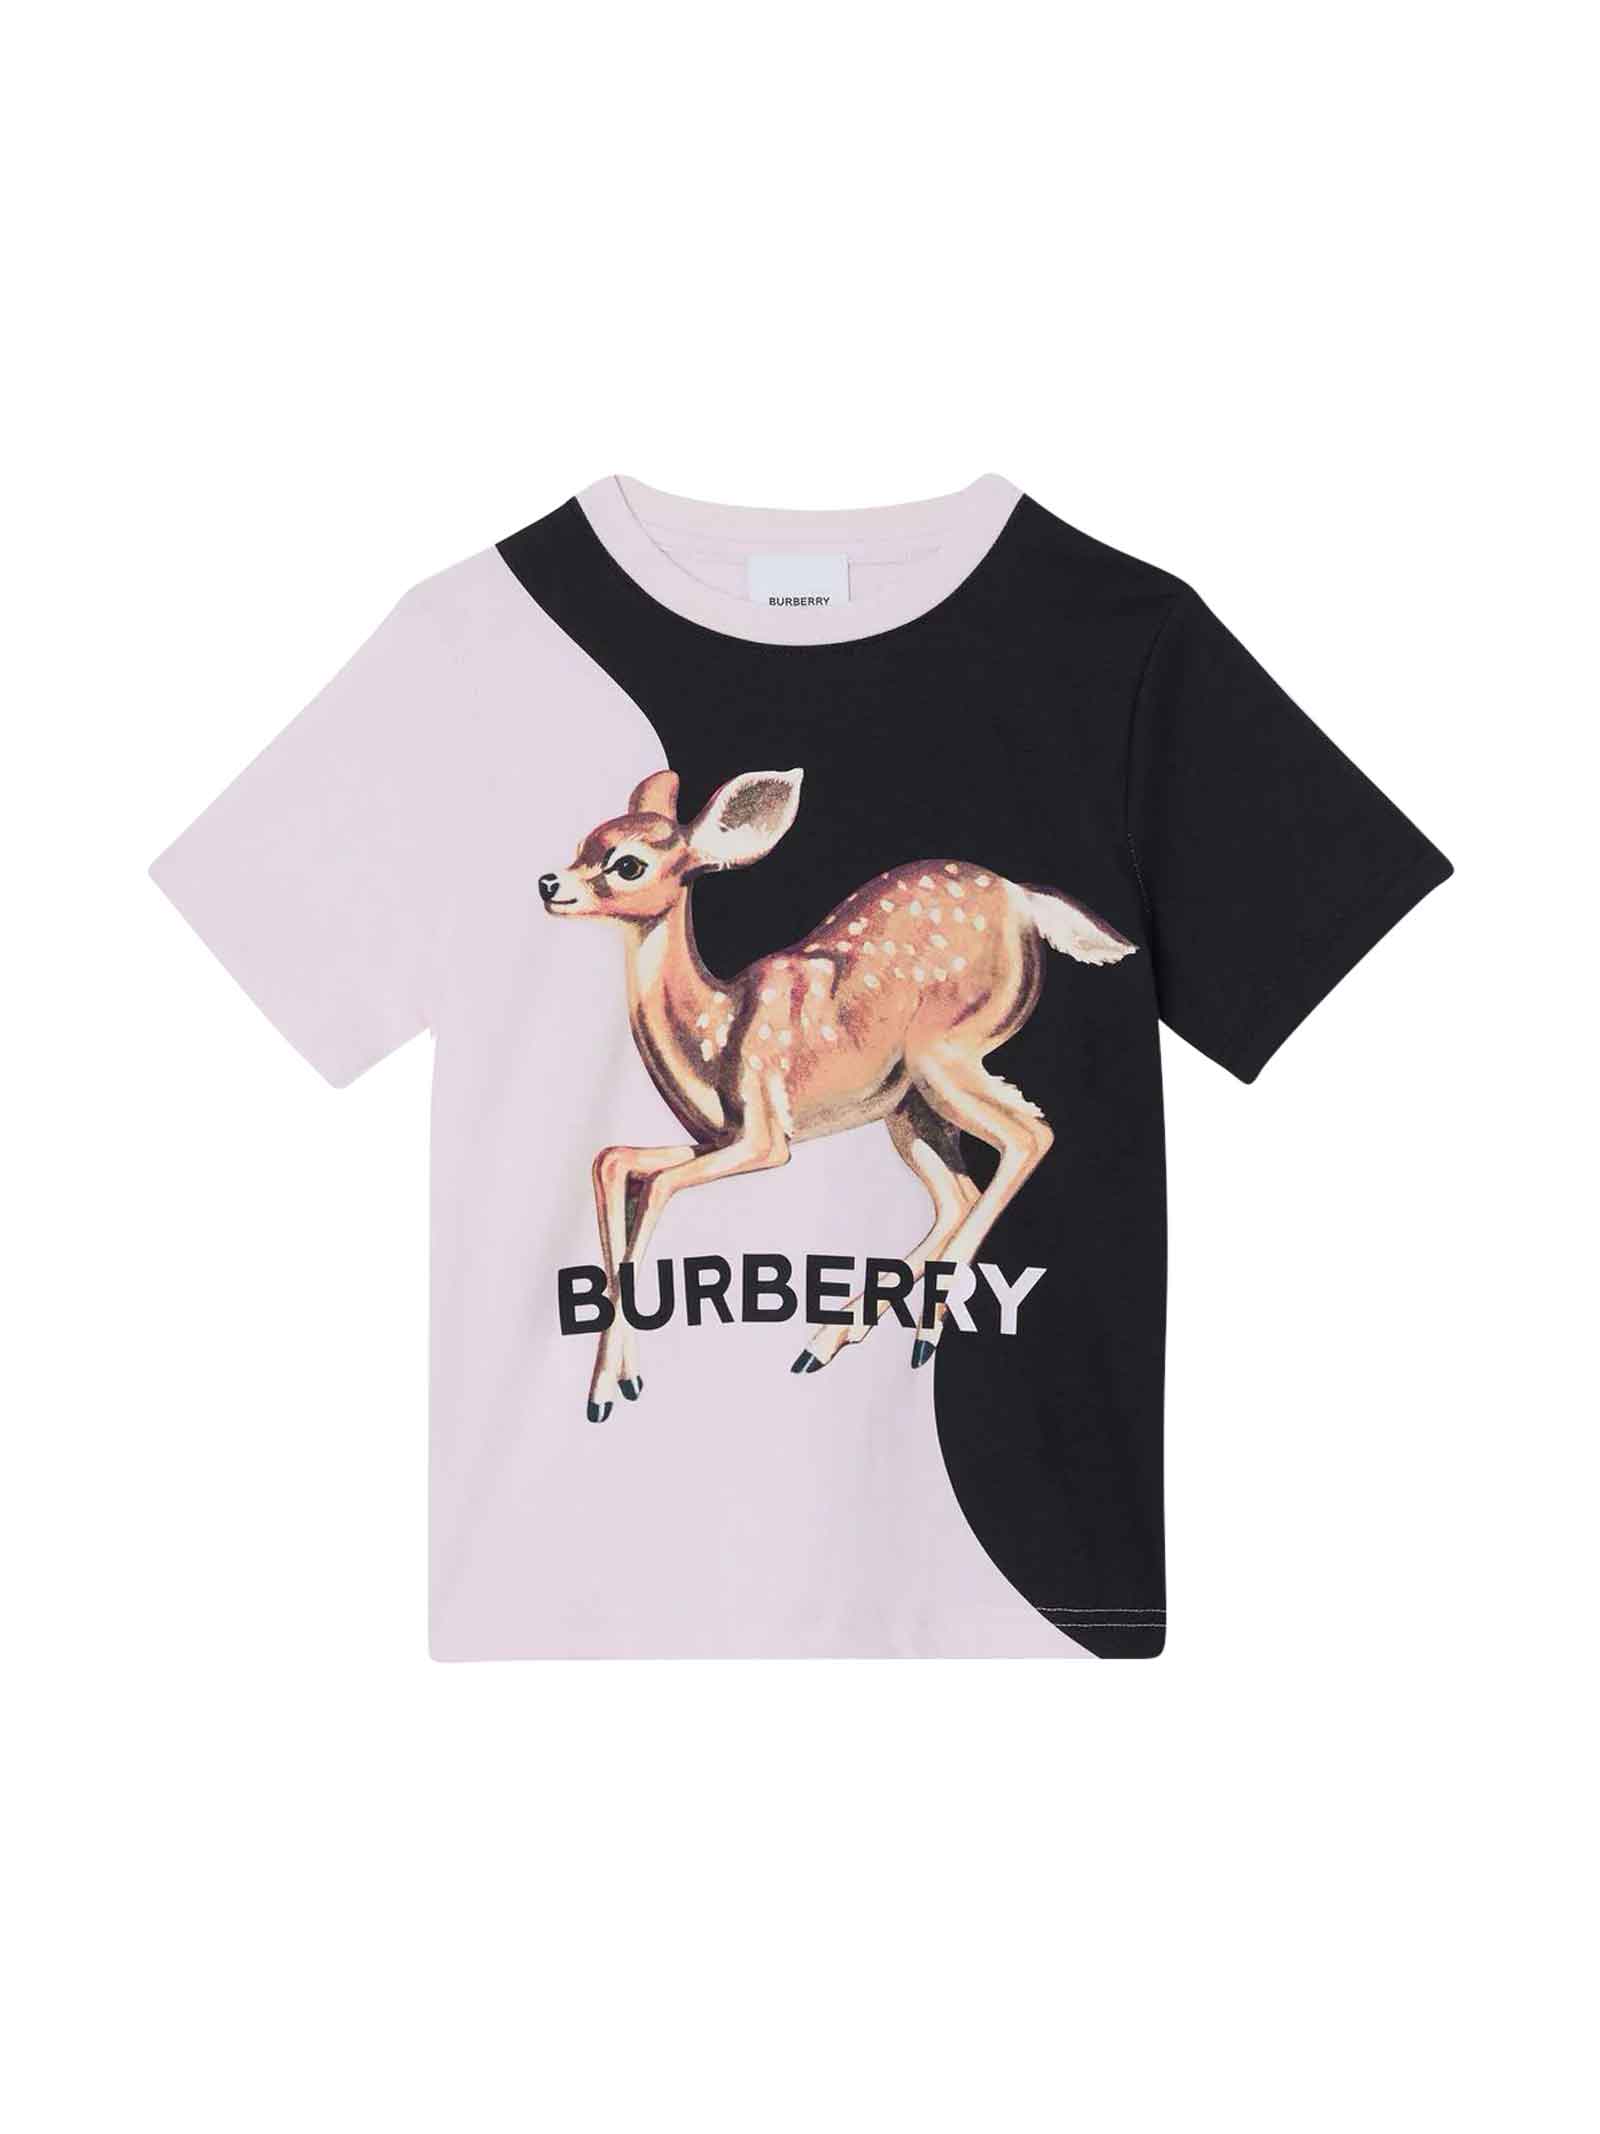 Burberry Black And White T-shirt With Print